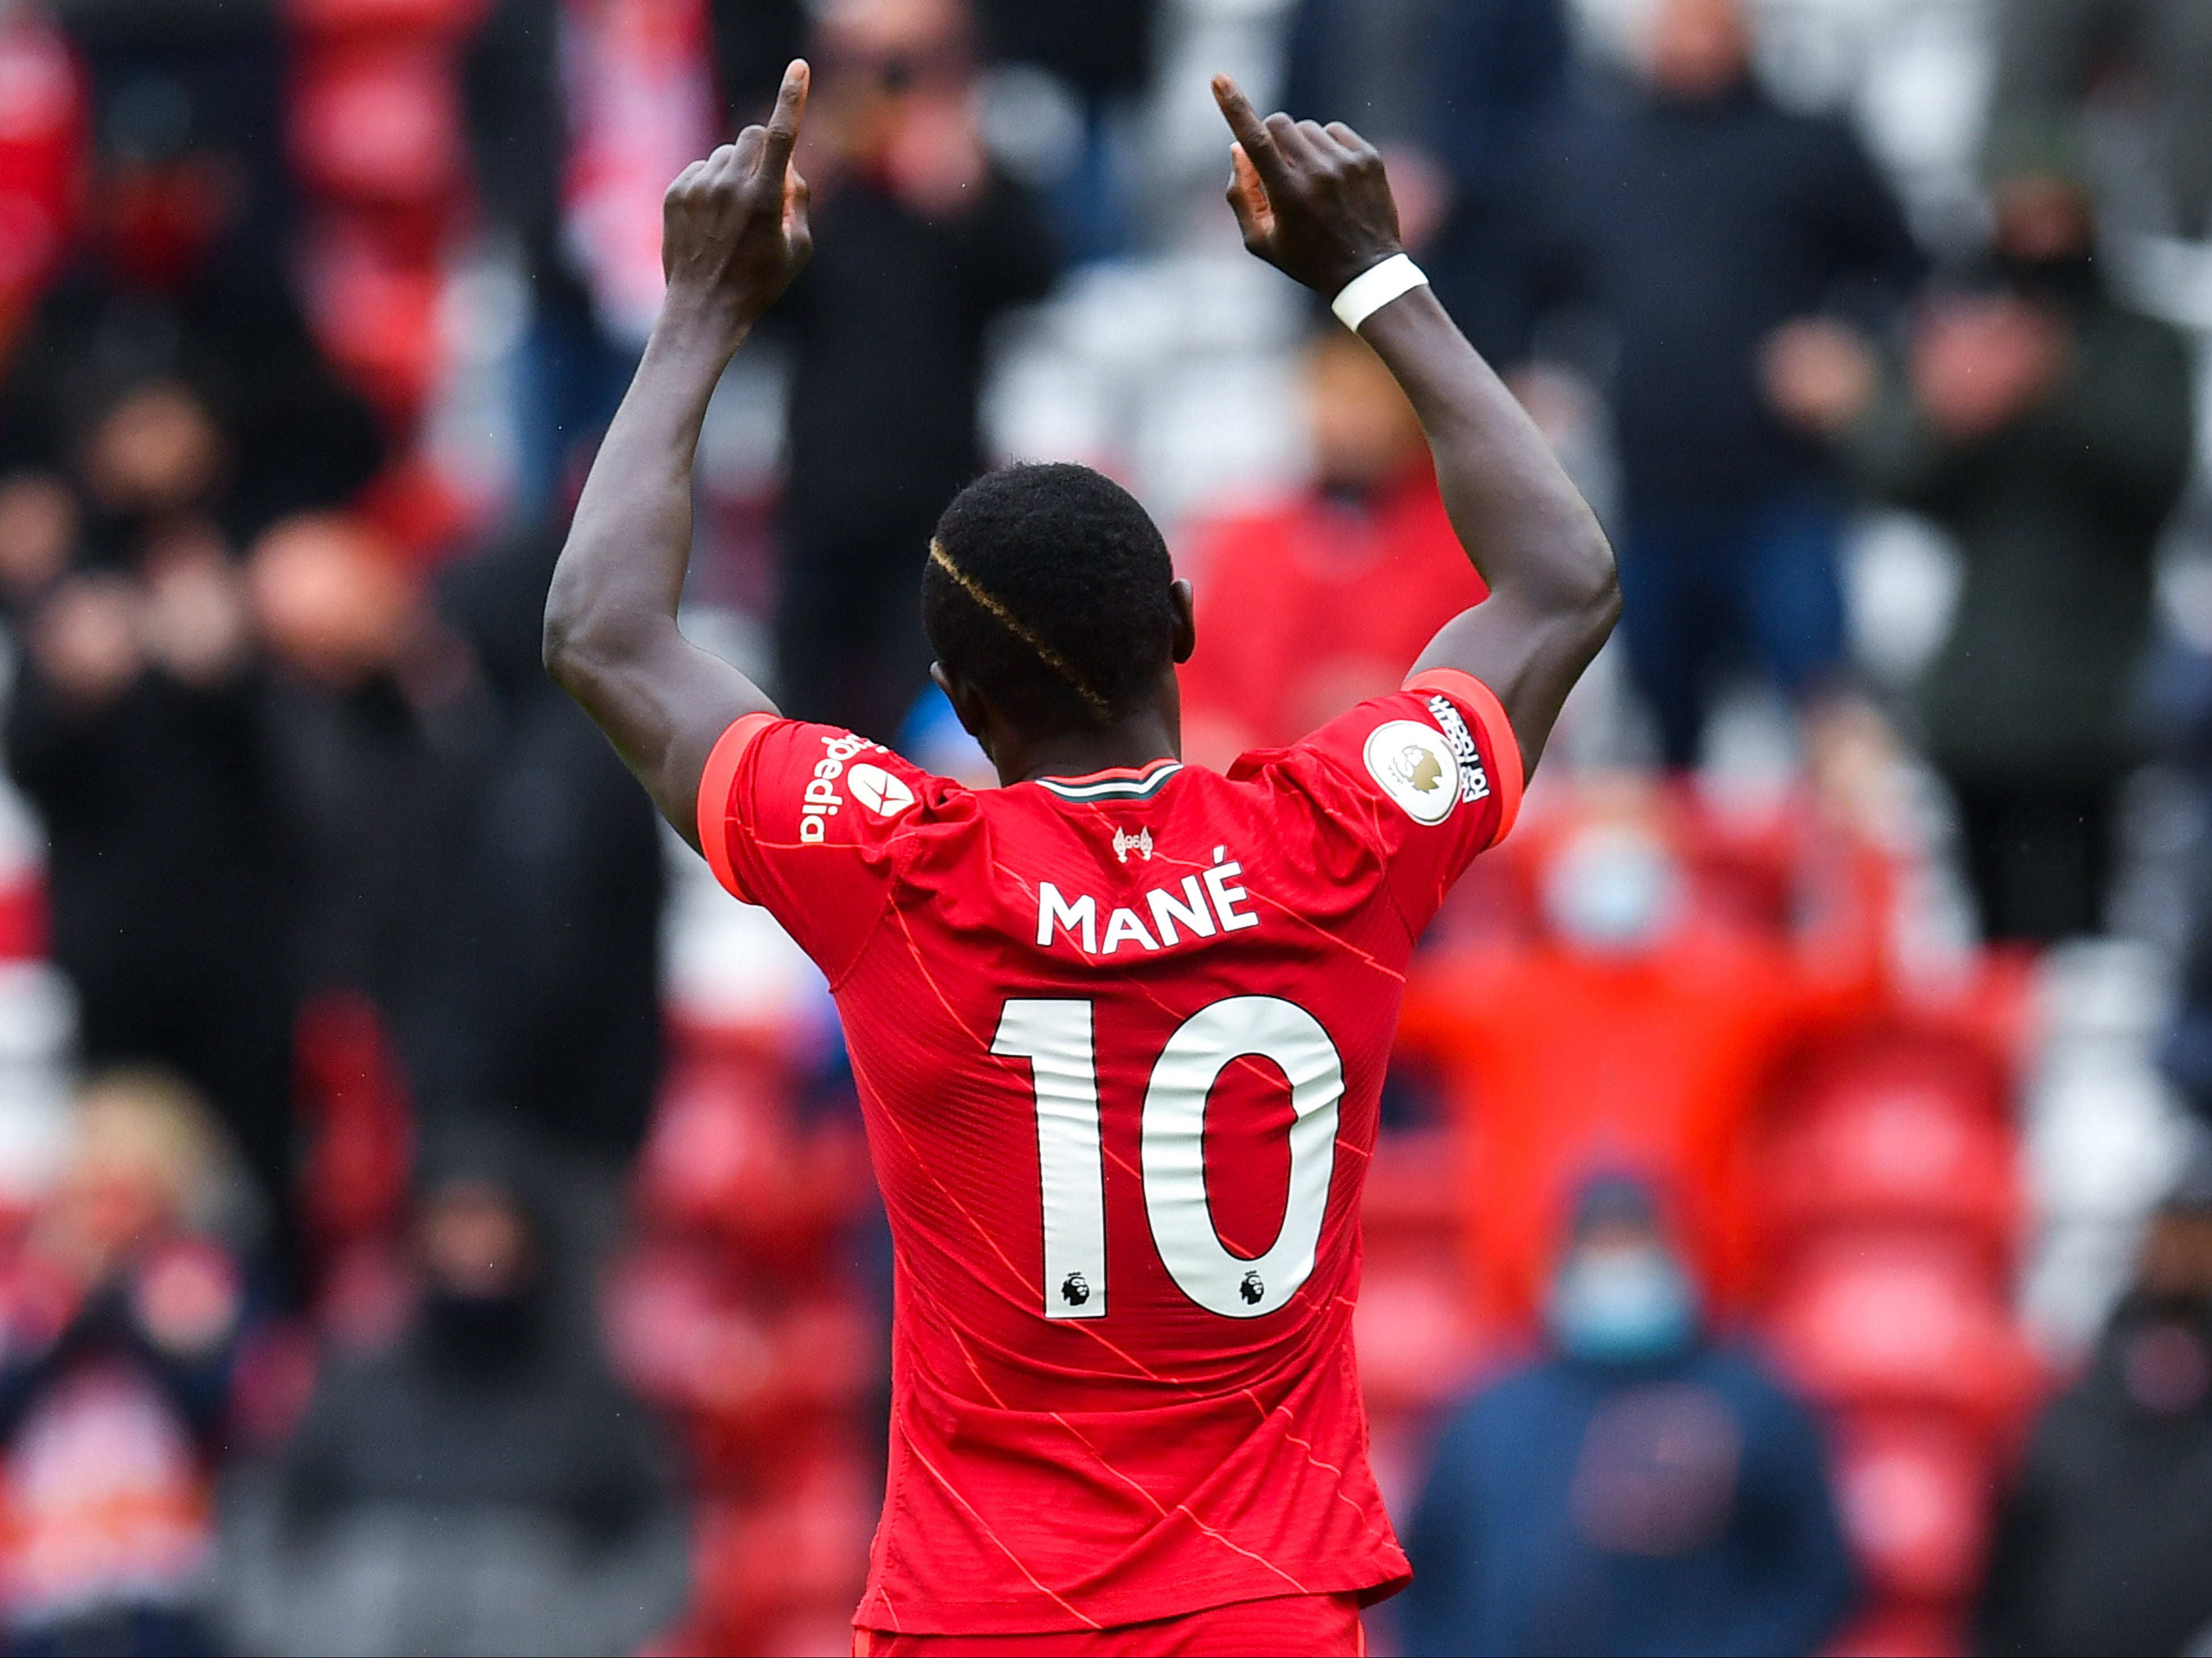 Sadio Mane leaves Liverpool after a wildly successful six years